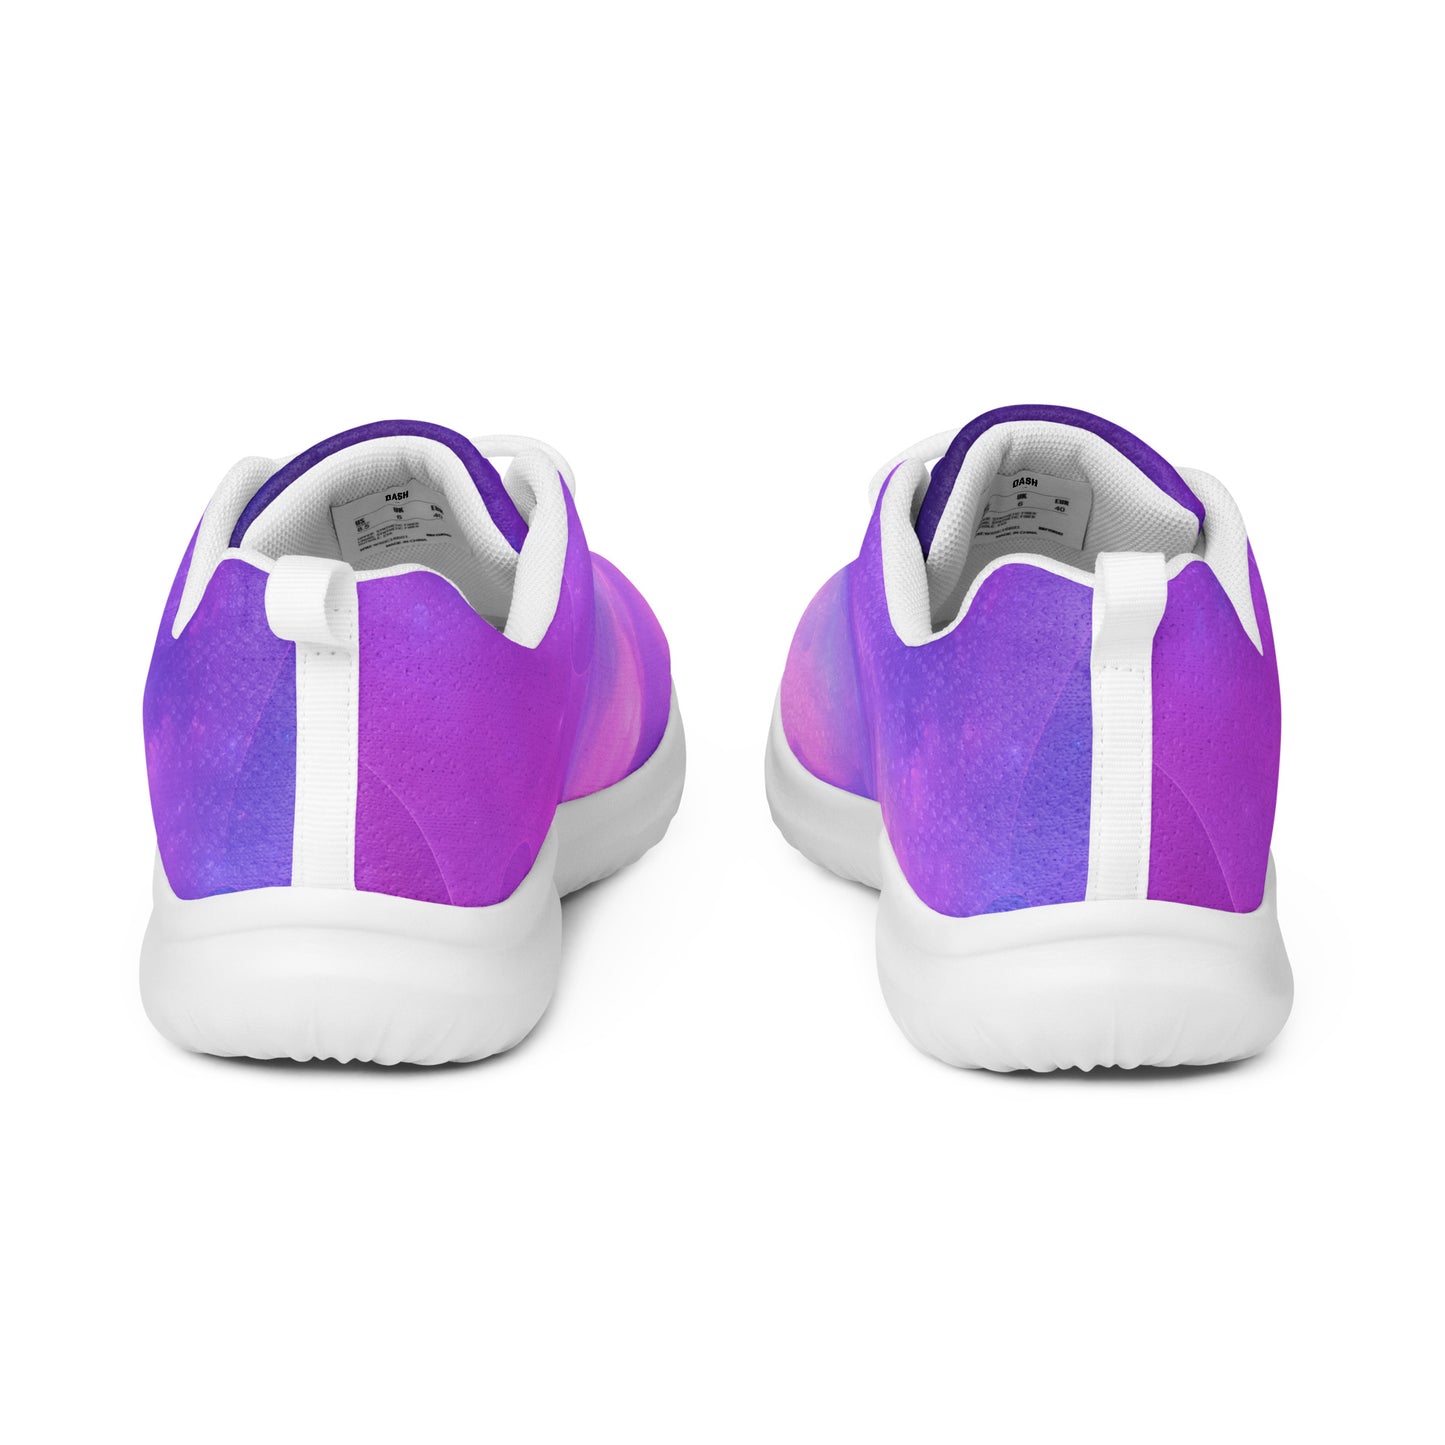 DASH Cosmic Women’s Athletic Shoes Lightweight Breathable Design by IOBI Original Apparel